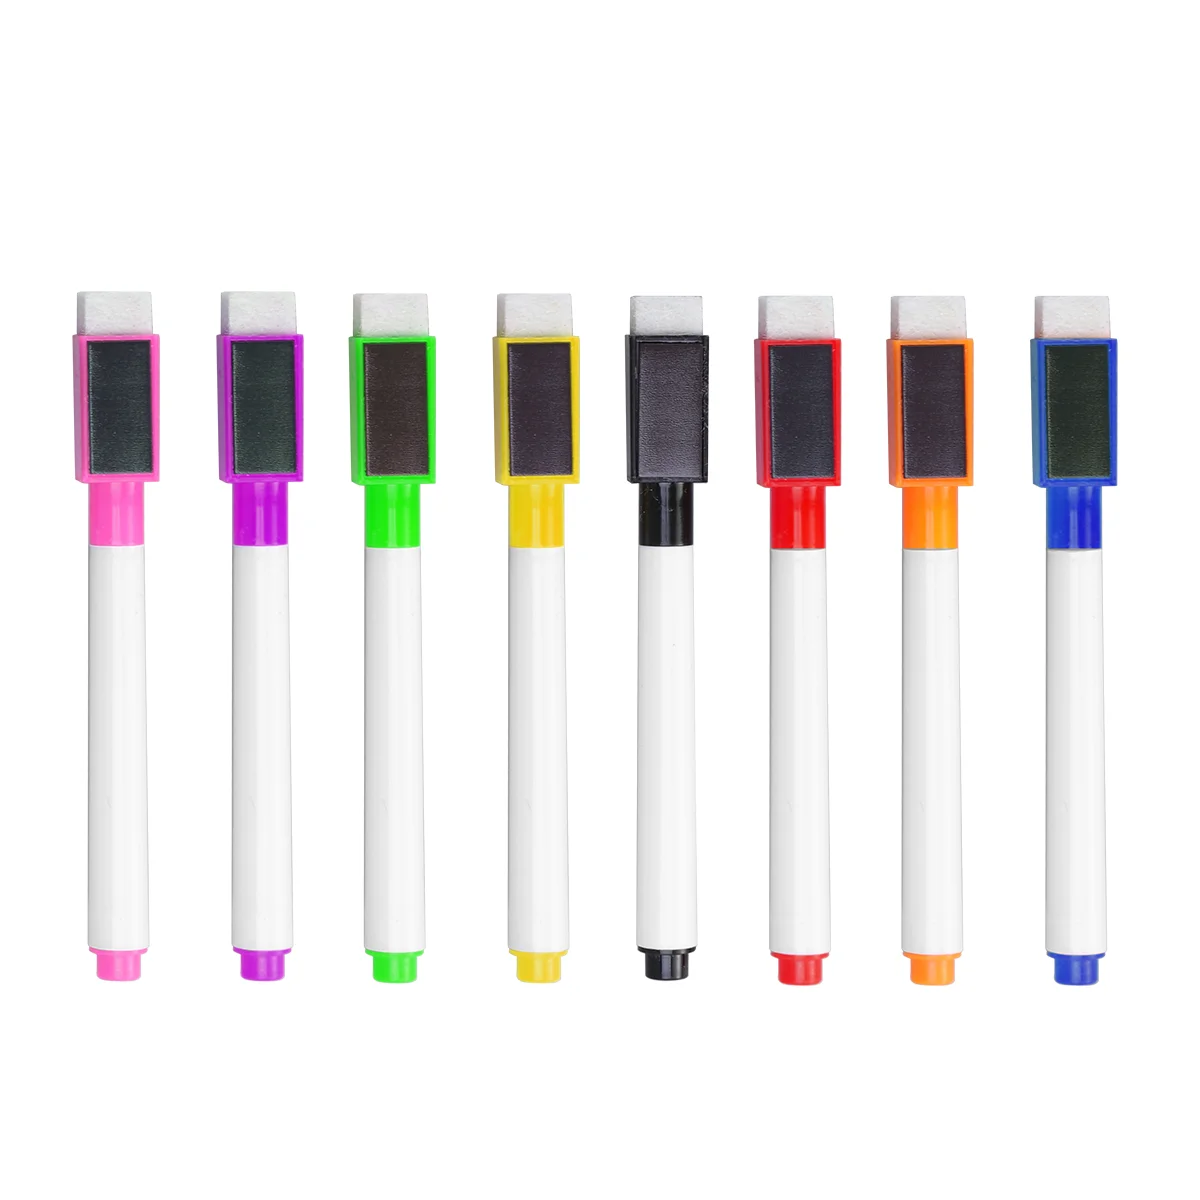 

8PCS Multi- functional Colorful Portable Black White Board Markers 8 Assorted Color Magnetic Whiteboard Pen Dry Erase Markers